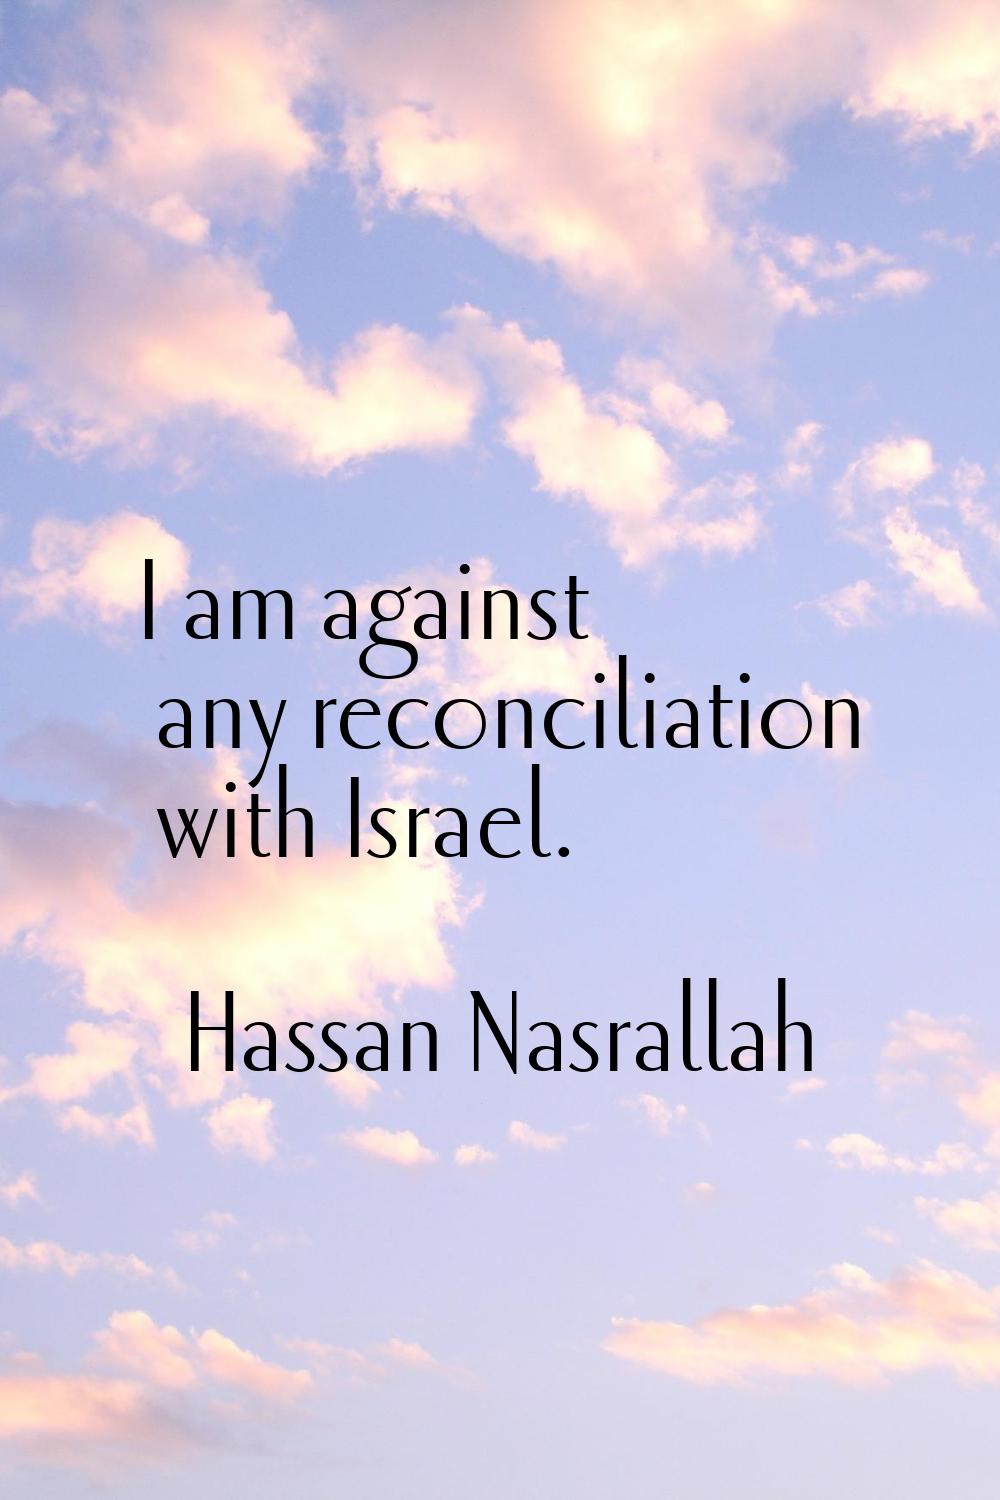 I am against any reconciliation with Israel.